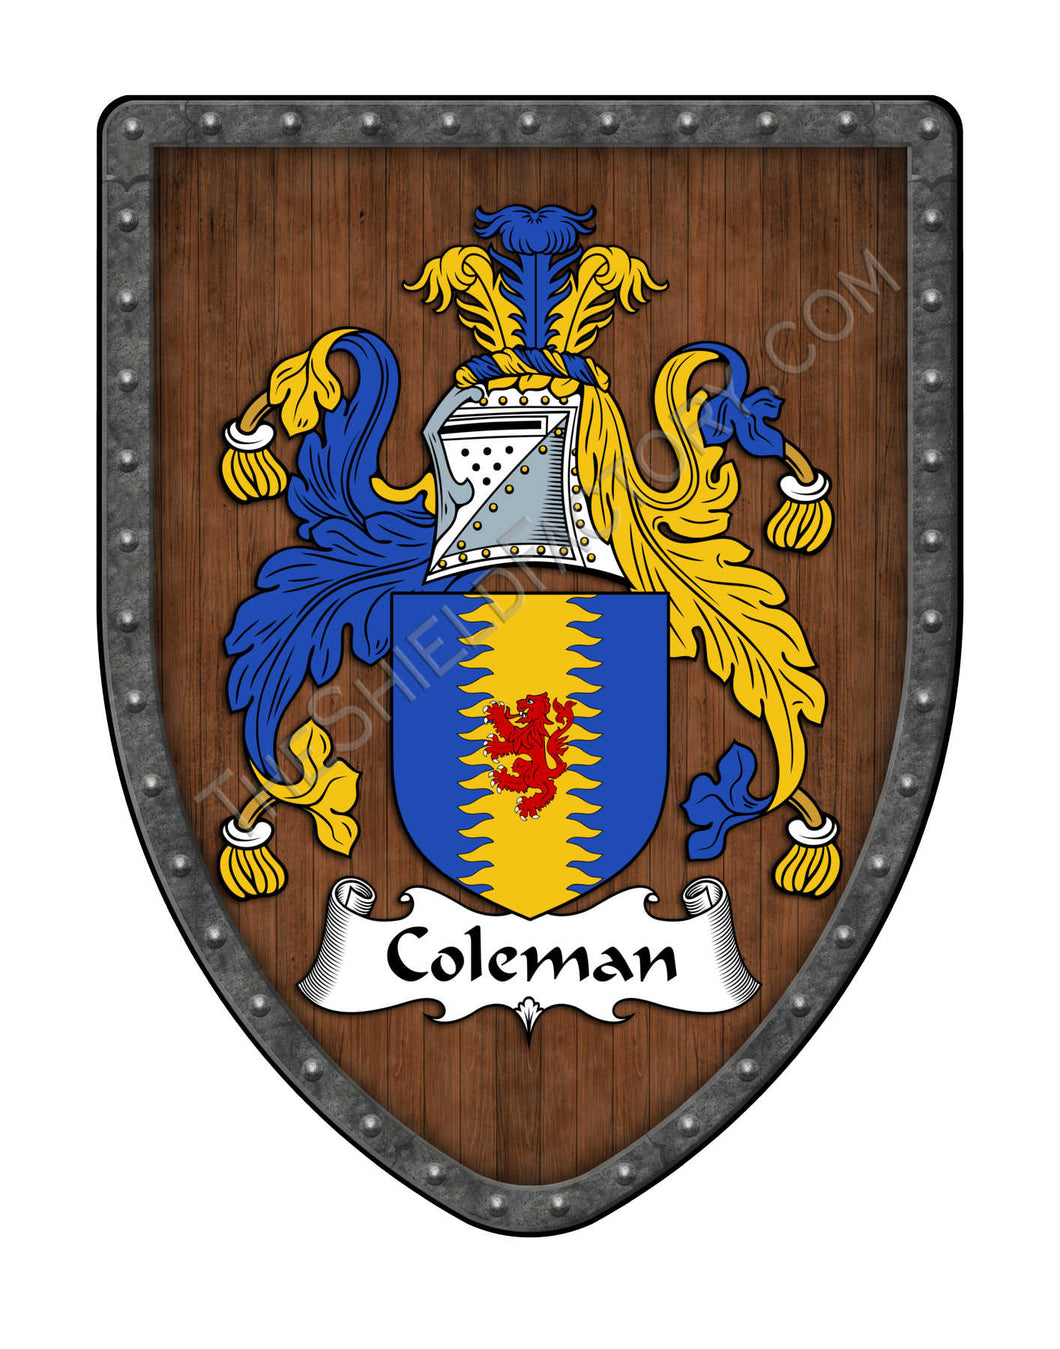 Coleman Coat of Arms Shield Family Crest